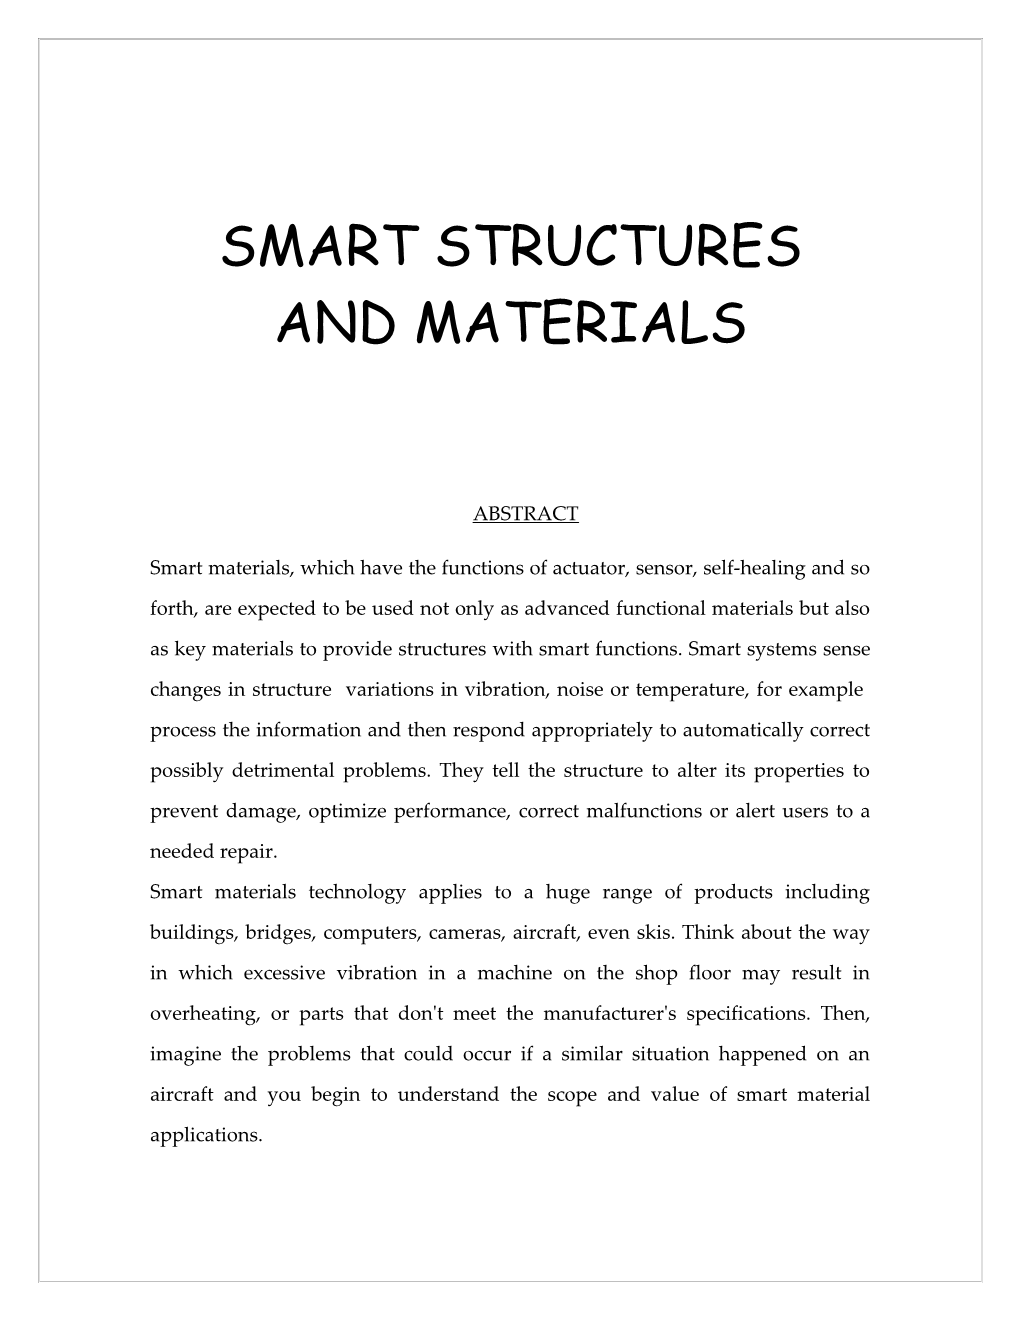 Smart Structures and Materils